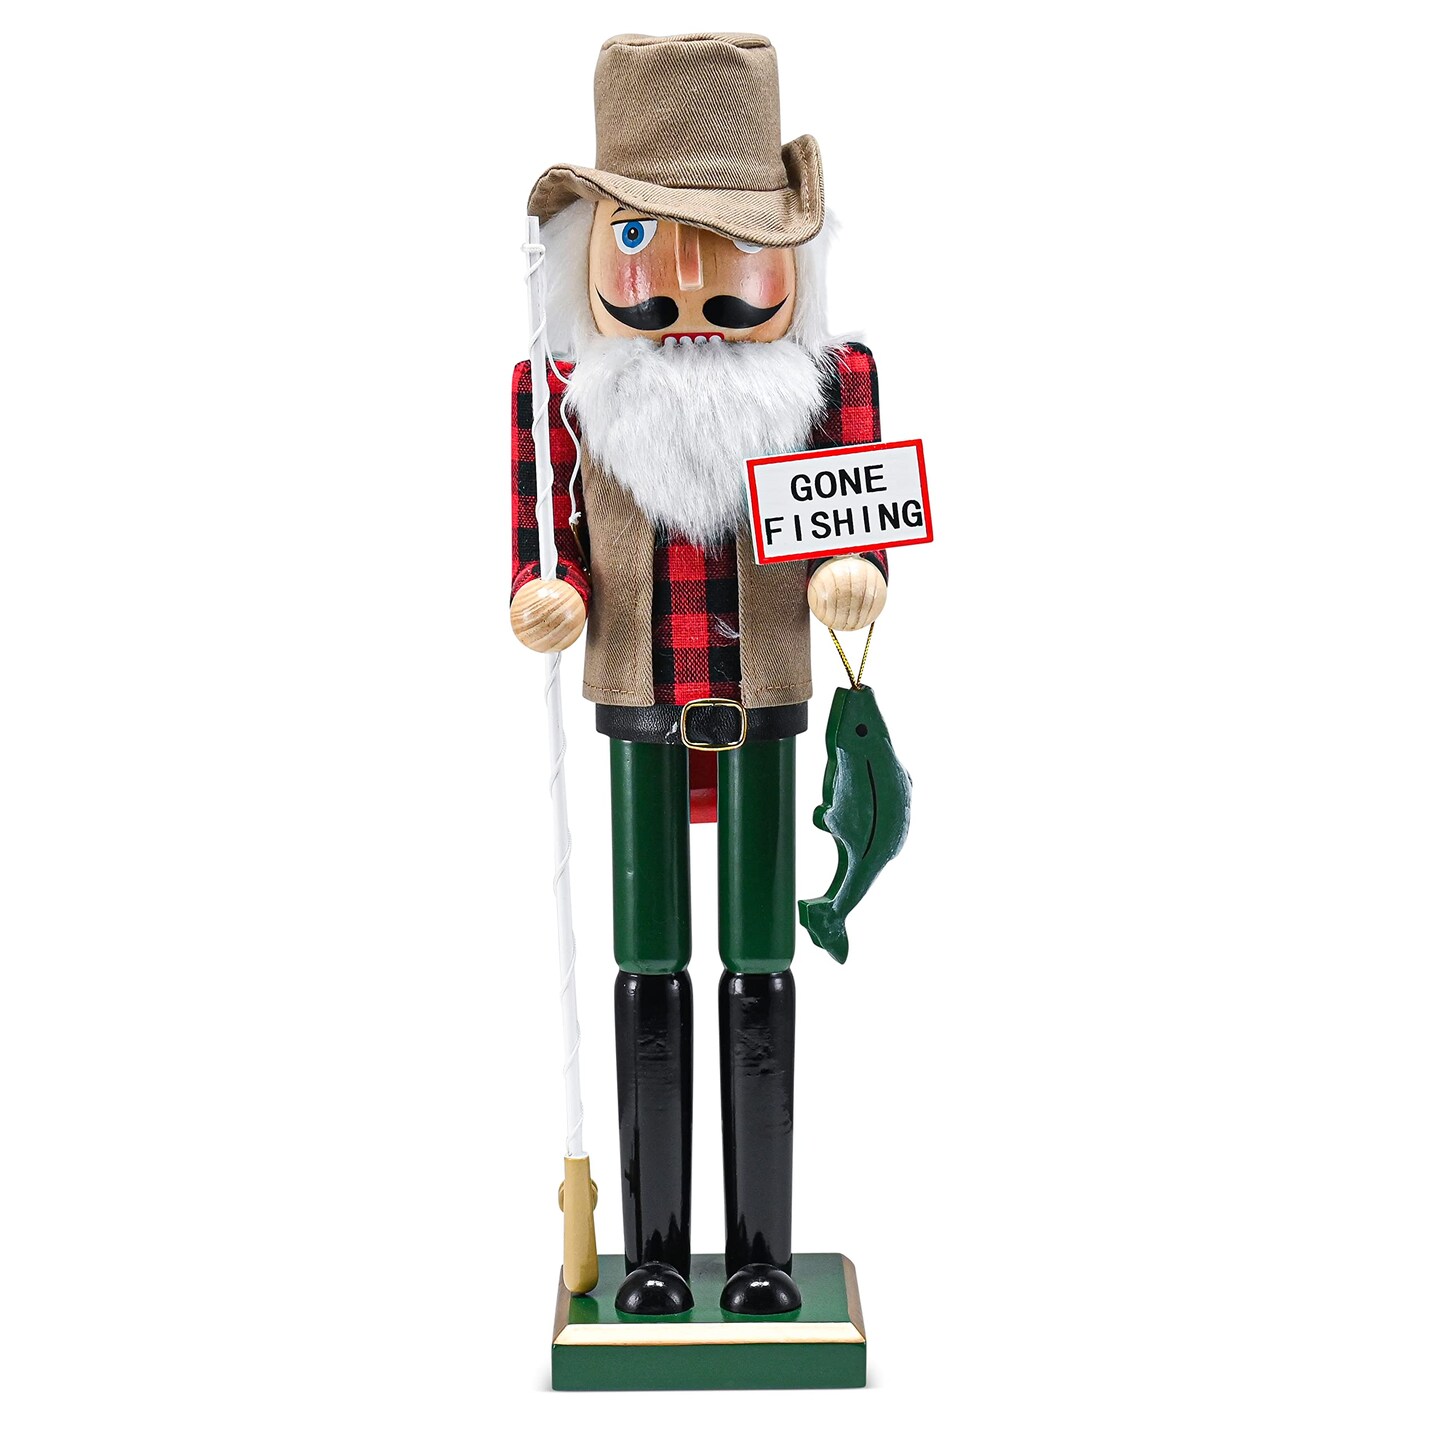 Ornativity Christmas Fisher Man Nutcracker – Red and Green Wooden Fisherman  Nutcracker Man with Fishing Rod and Fish in Hand Xmas Themed Holiday Nut  Cracker Doll Figure Decorations